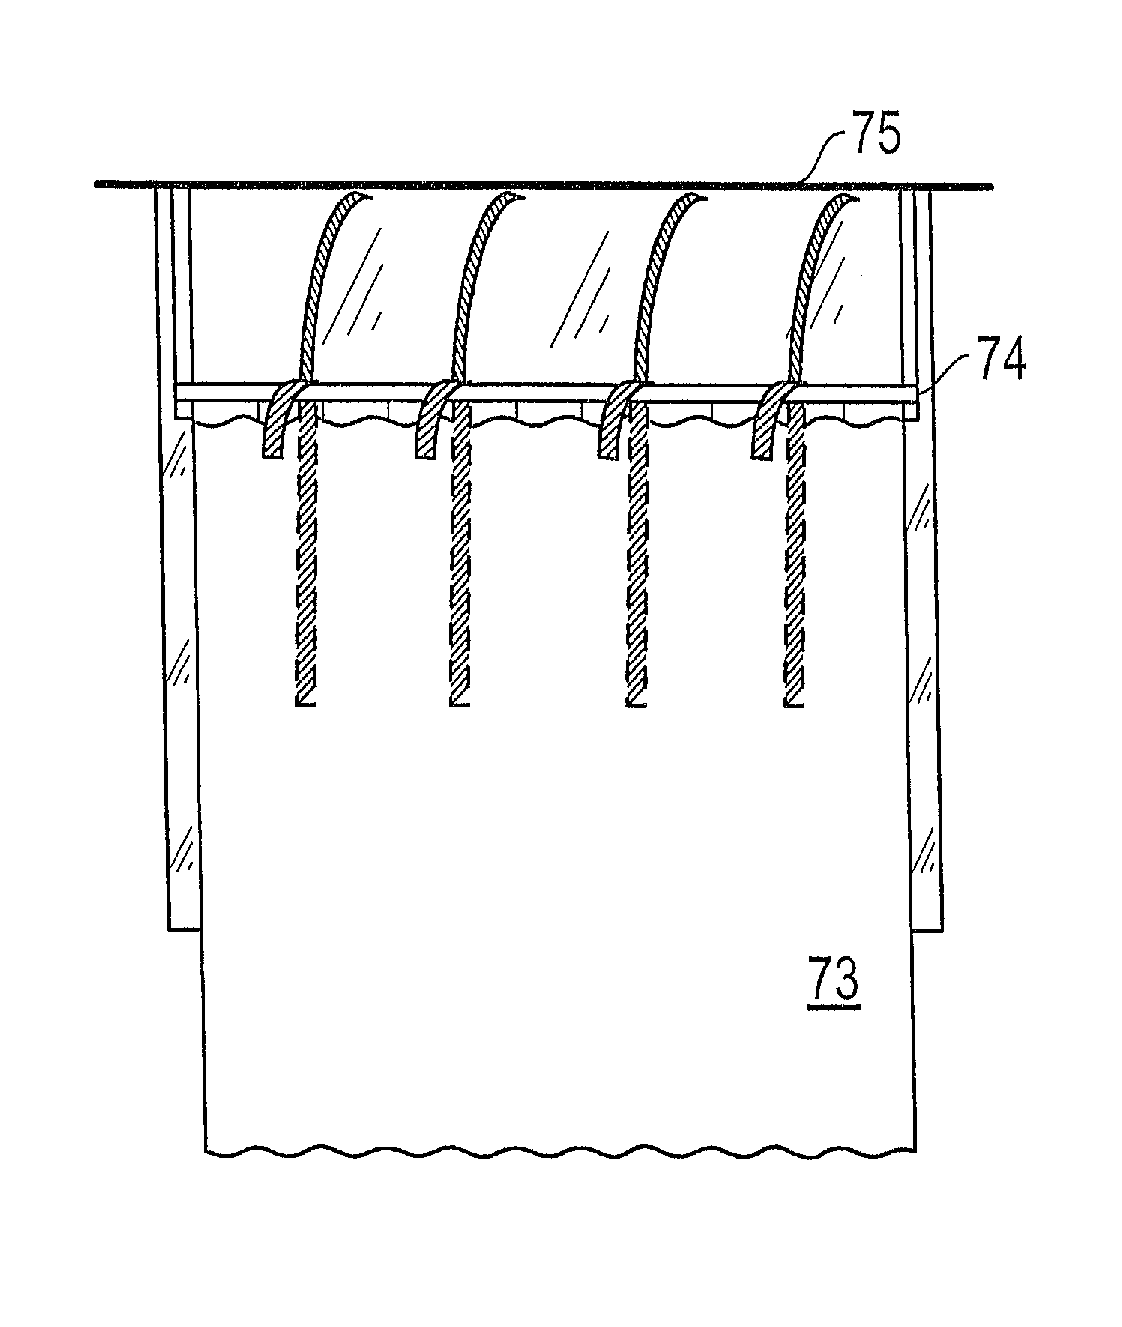 Containment curtains as well as systems and apparatuses including same